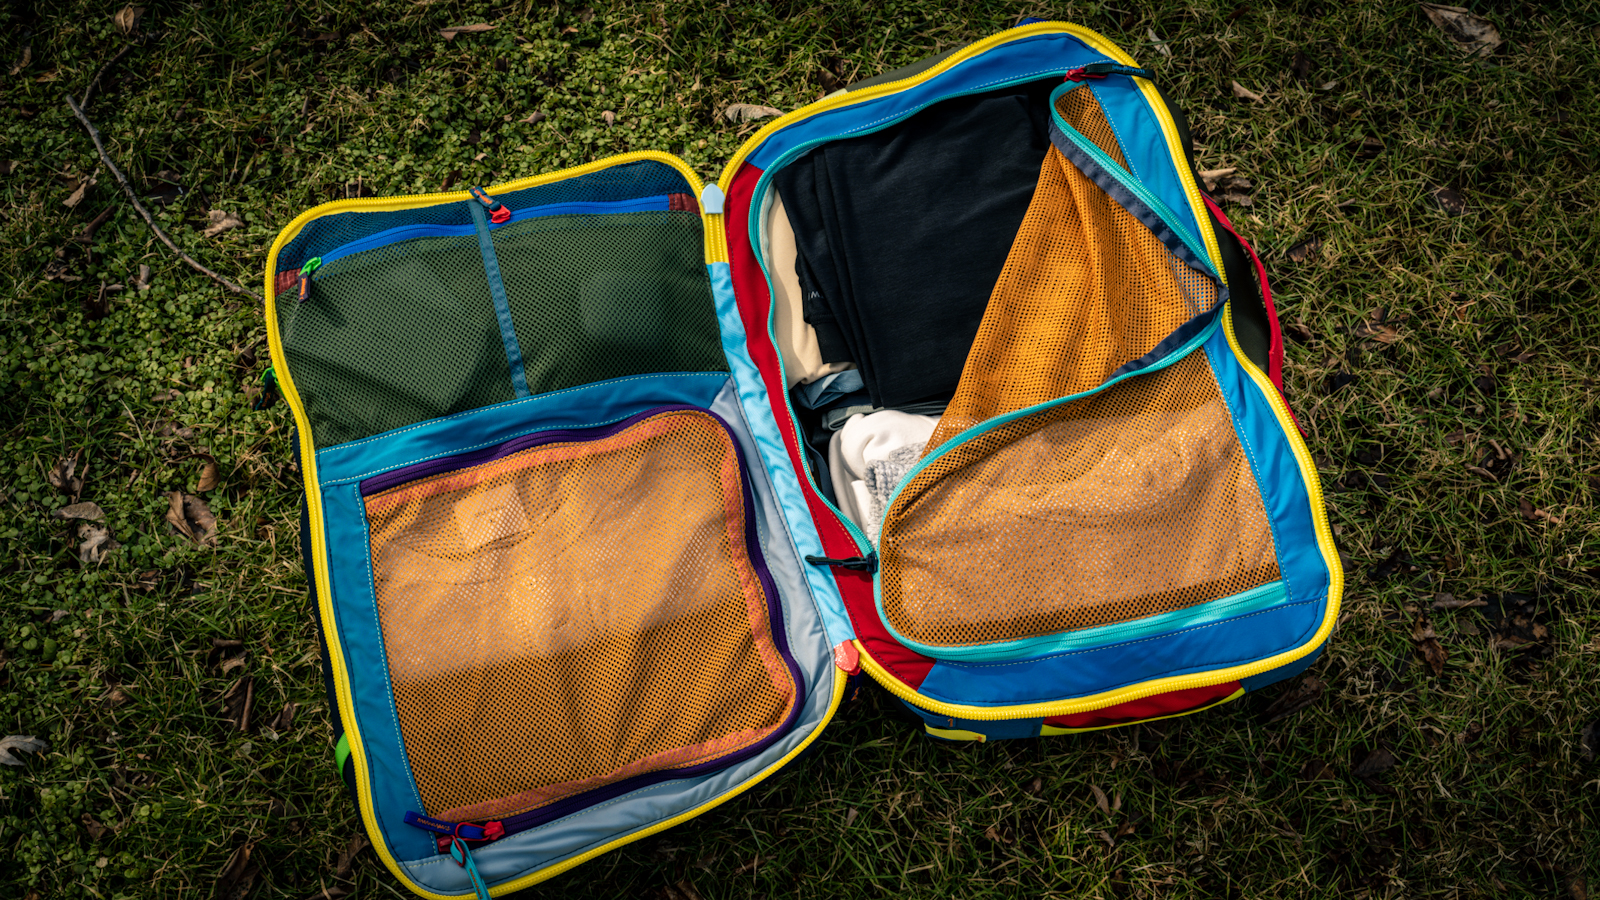 The 11 Best Duffel Bags in 2022 - Recommended Travel Duffel Bags